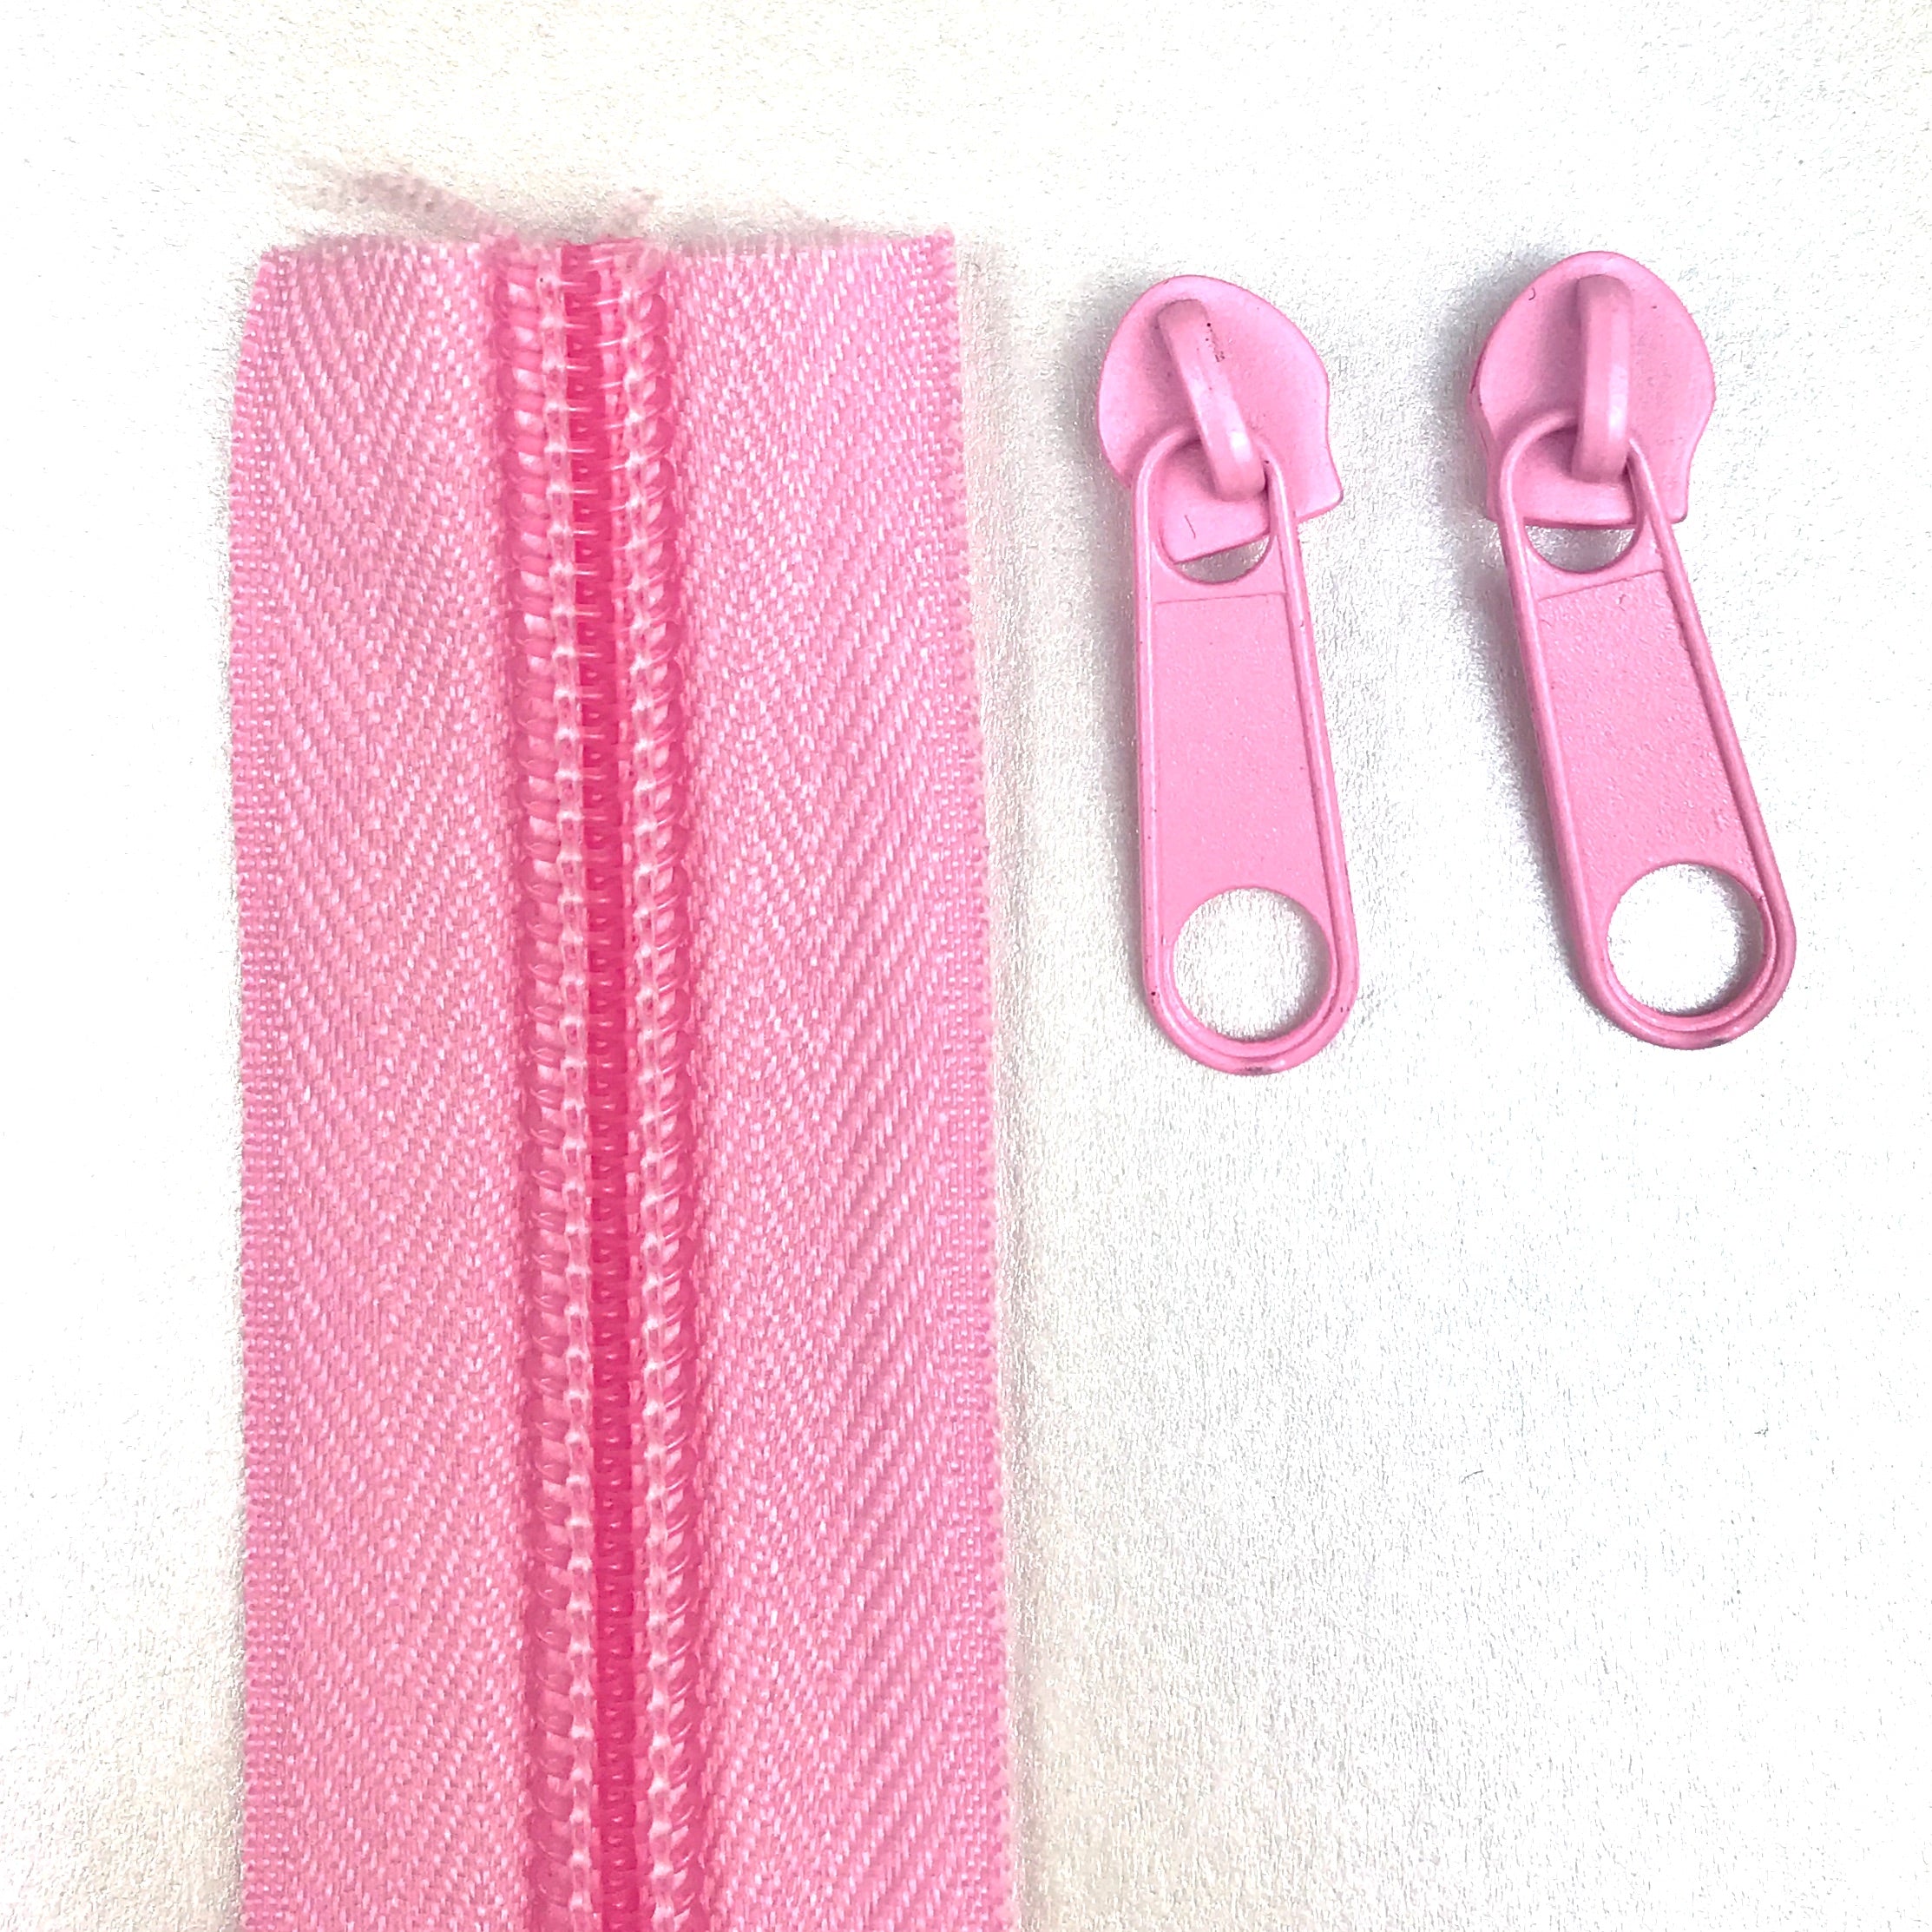 continuous long chain standard zipper tape in light pink